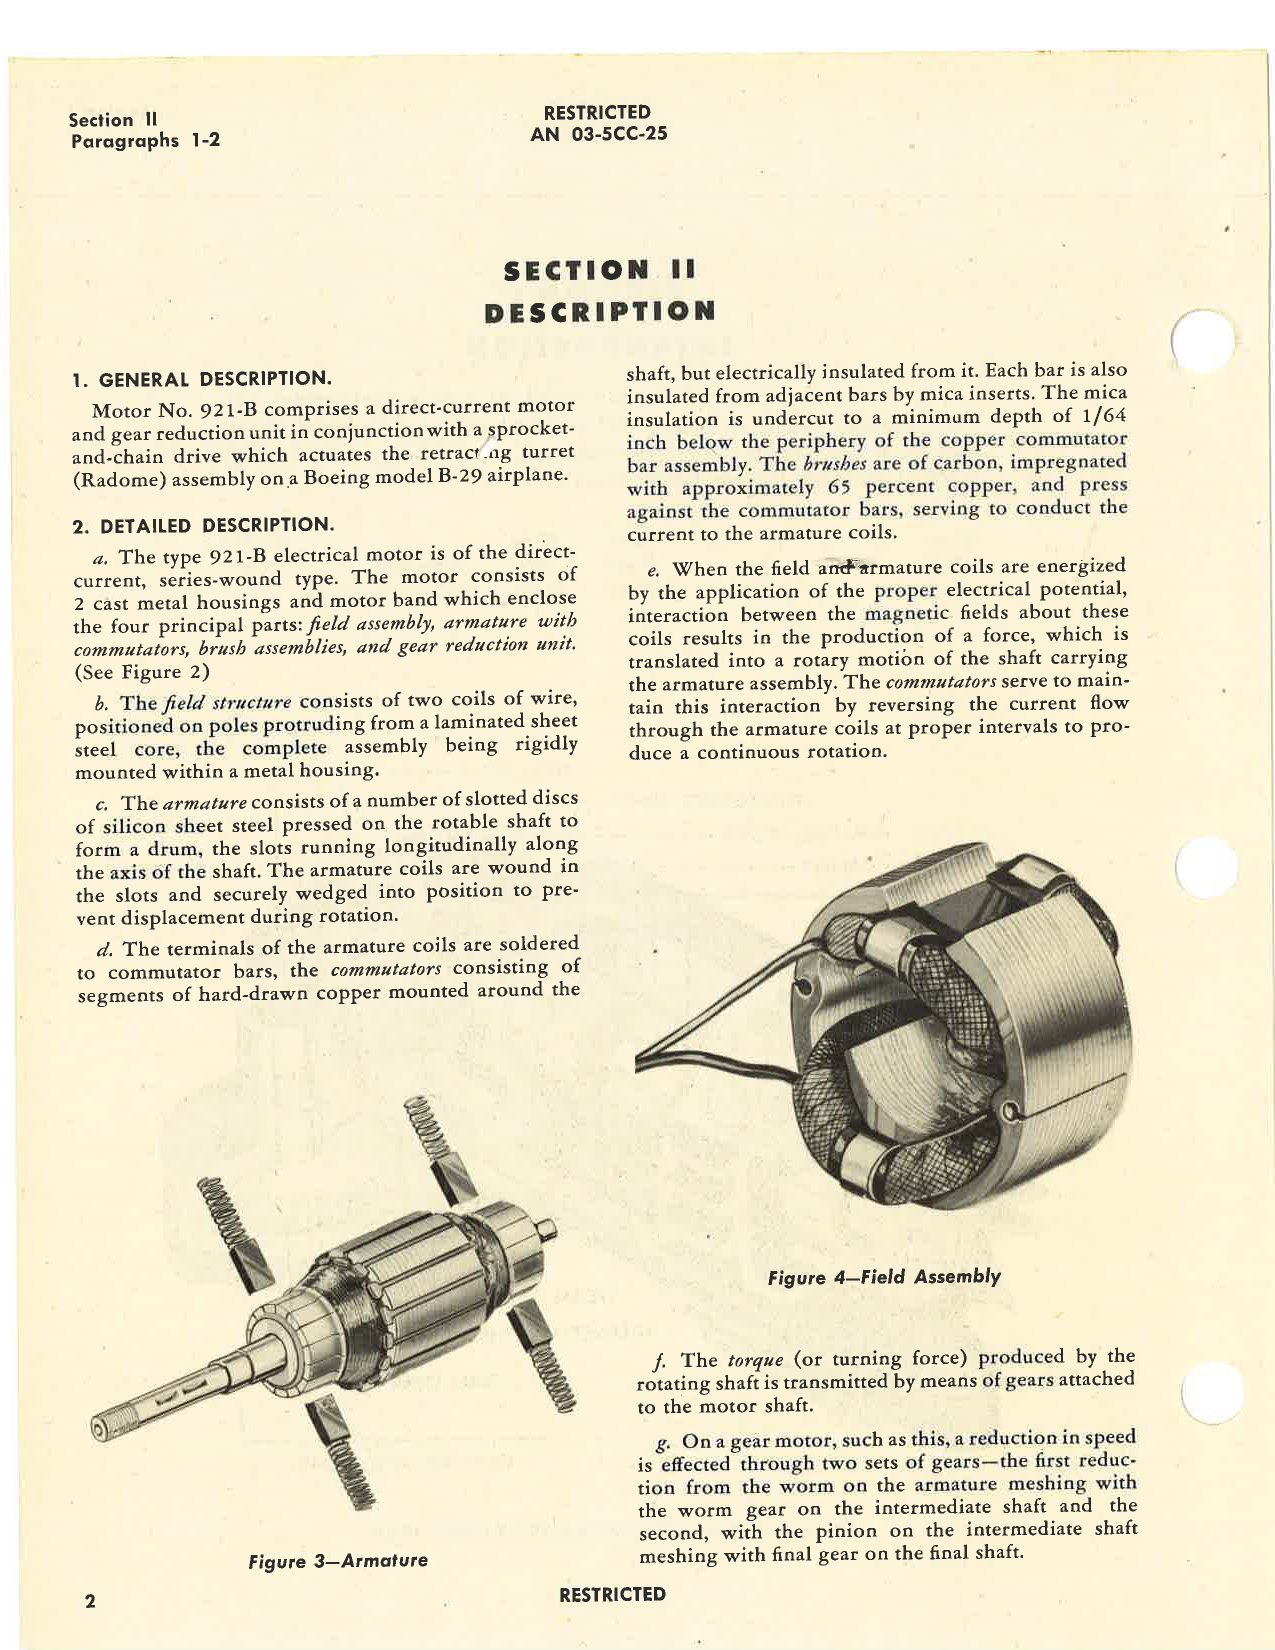 Sample page 6 from AirCorps Library document: Overhaul Instructions with Parts Catalog for Type 921-B Fractional Horsepower Electrical Motor